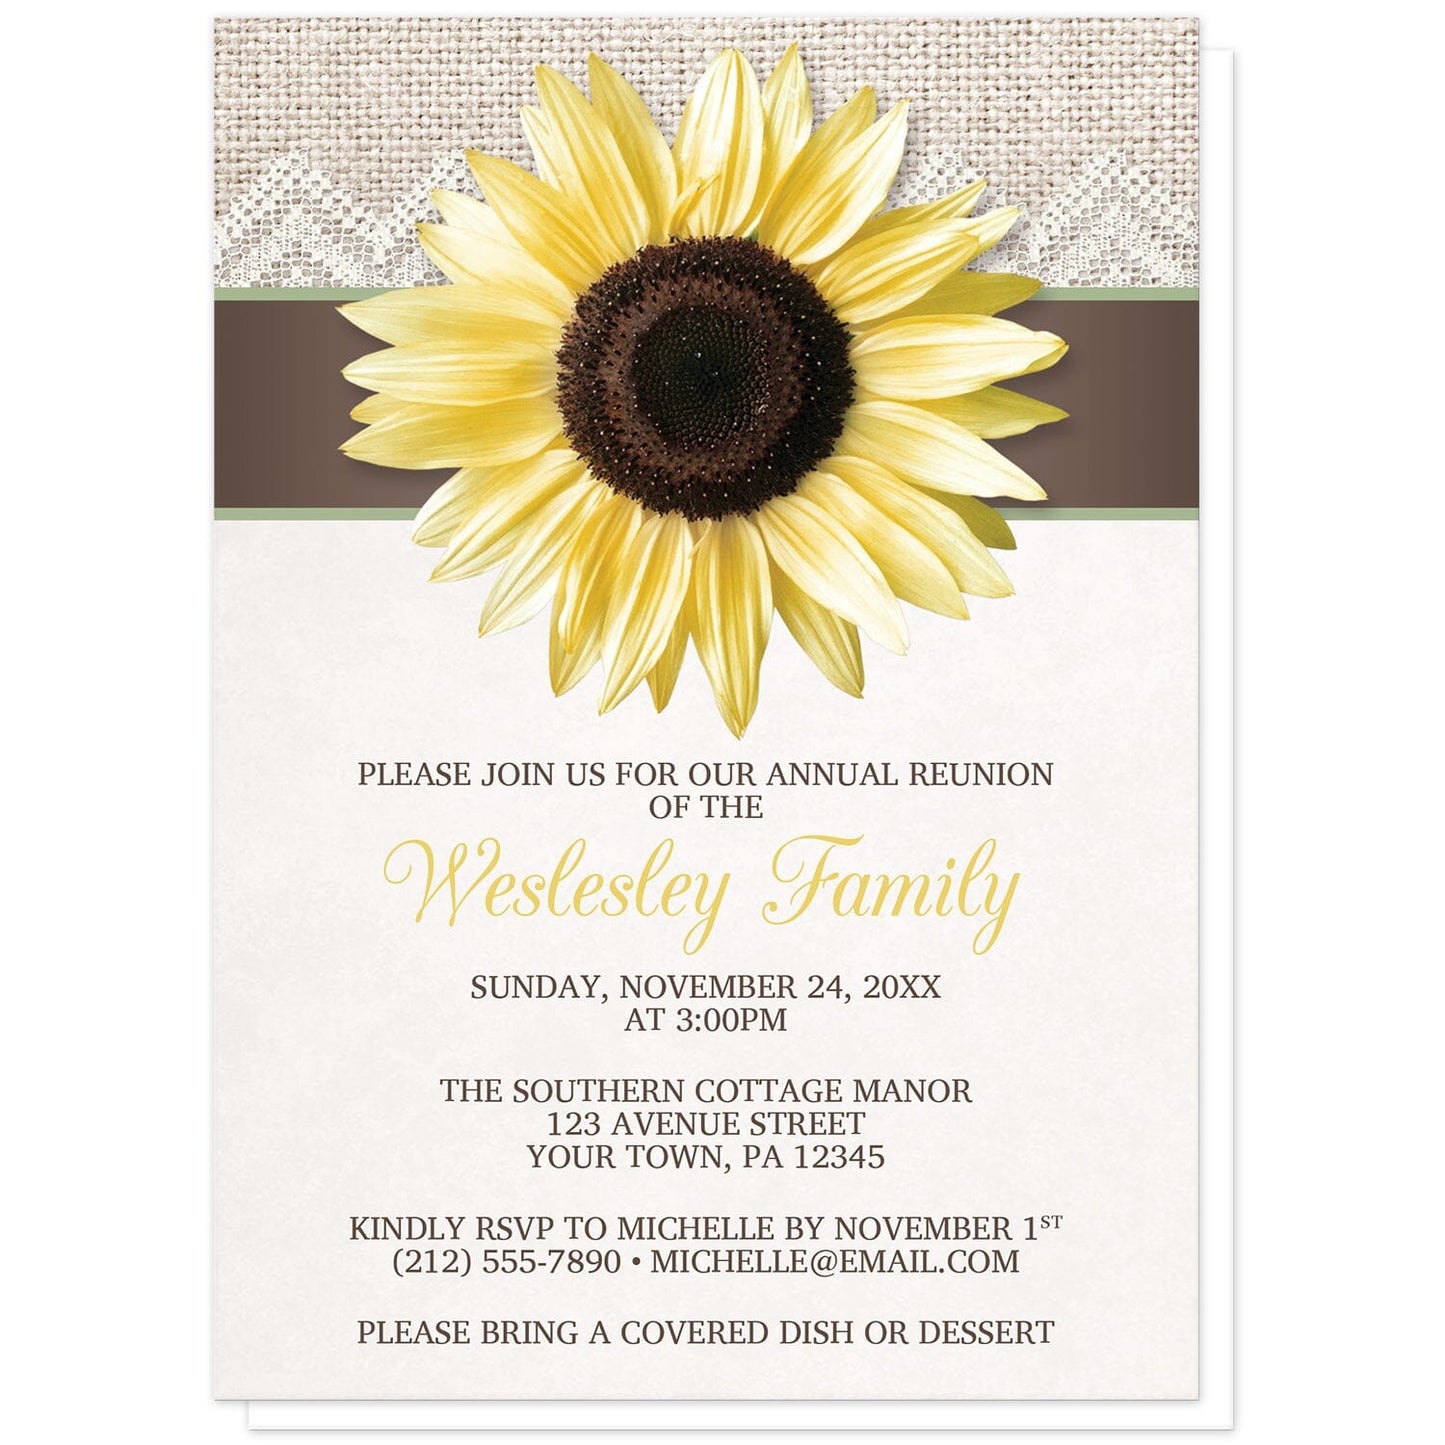 Burlap Lace Brown Sage Sunflower Family Reunion Invitations at Artistically Invited. Burlap lace brown sage sunflower family reunion invitations designed with a big yellow sunflower on a brown ribbon stripe with sage green edges and a rustic burlap and lace background illustration along the top of the invitations. Your personalized family reunion celebration details are custom printed in yellow and brown over a light beige background color below the sunflower design. 